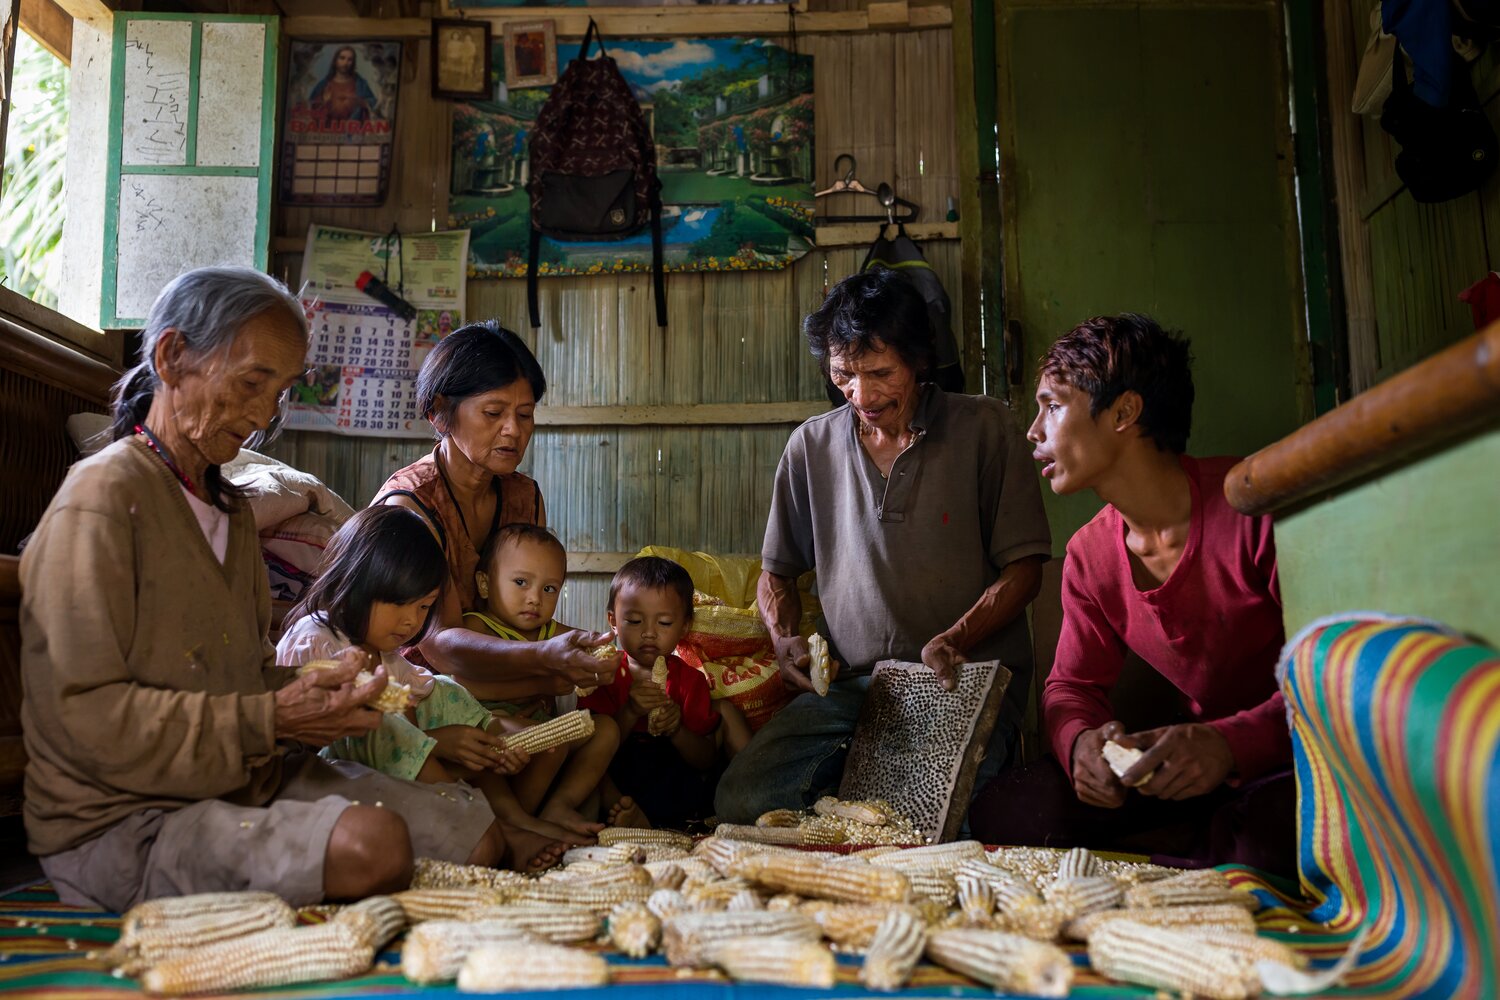 Herminia Dajao, 86, and her family, prepare corn for milling in her family home in Pueblo Antonia, Davao. Maize is an especially traditional crop in Davao. Its history goes back to the galleon trade between Spanish colonies nearly 500 years ago, when ships carried seeds across the Pacific Ocean from Mexico. Those seeds became the basis for uniquely Filipino maize diversity that farmers shared, bred, and handed down through the centuries.